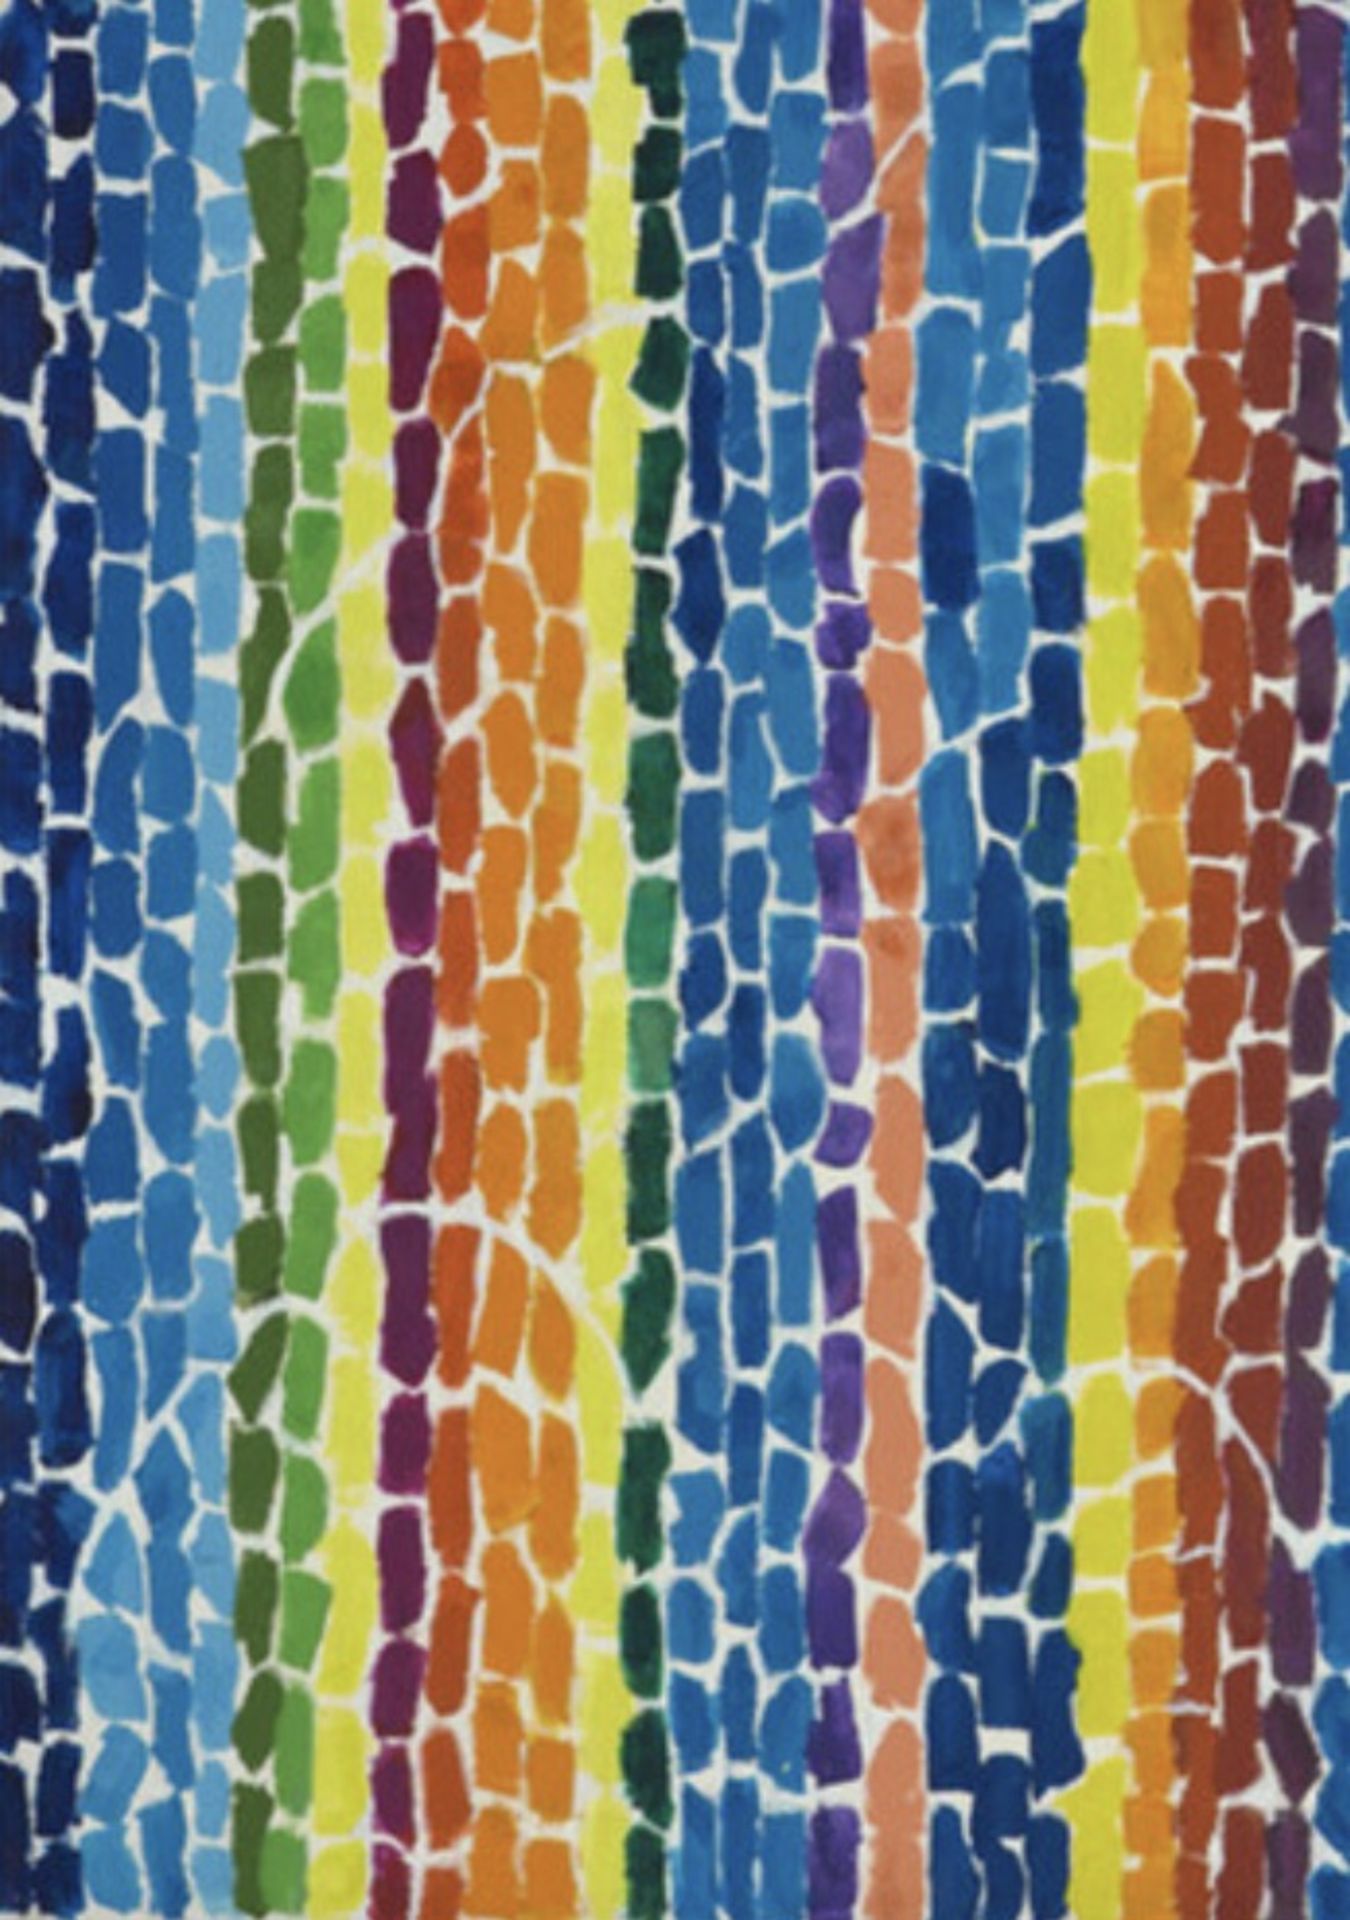 Alma Thomas "Wind, Sunshine, and Flowers, 1968" Offset Lithograph - Image 5 of 5